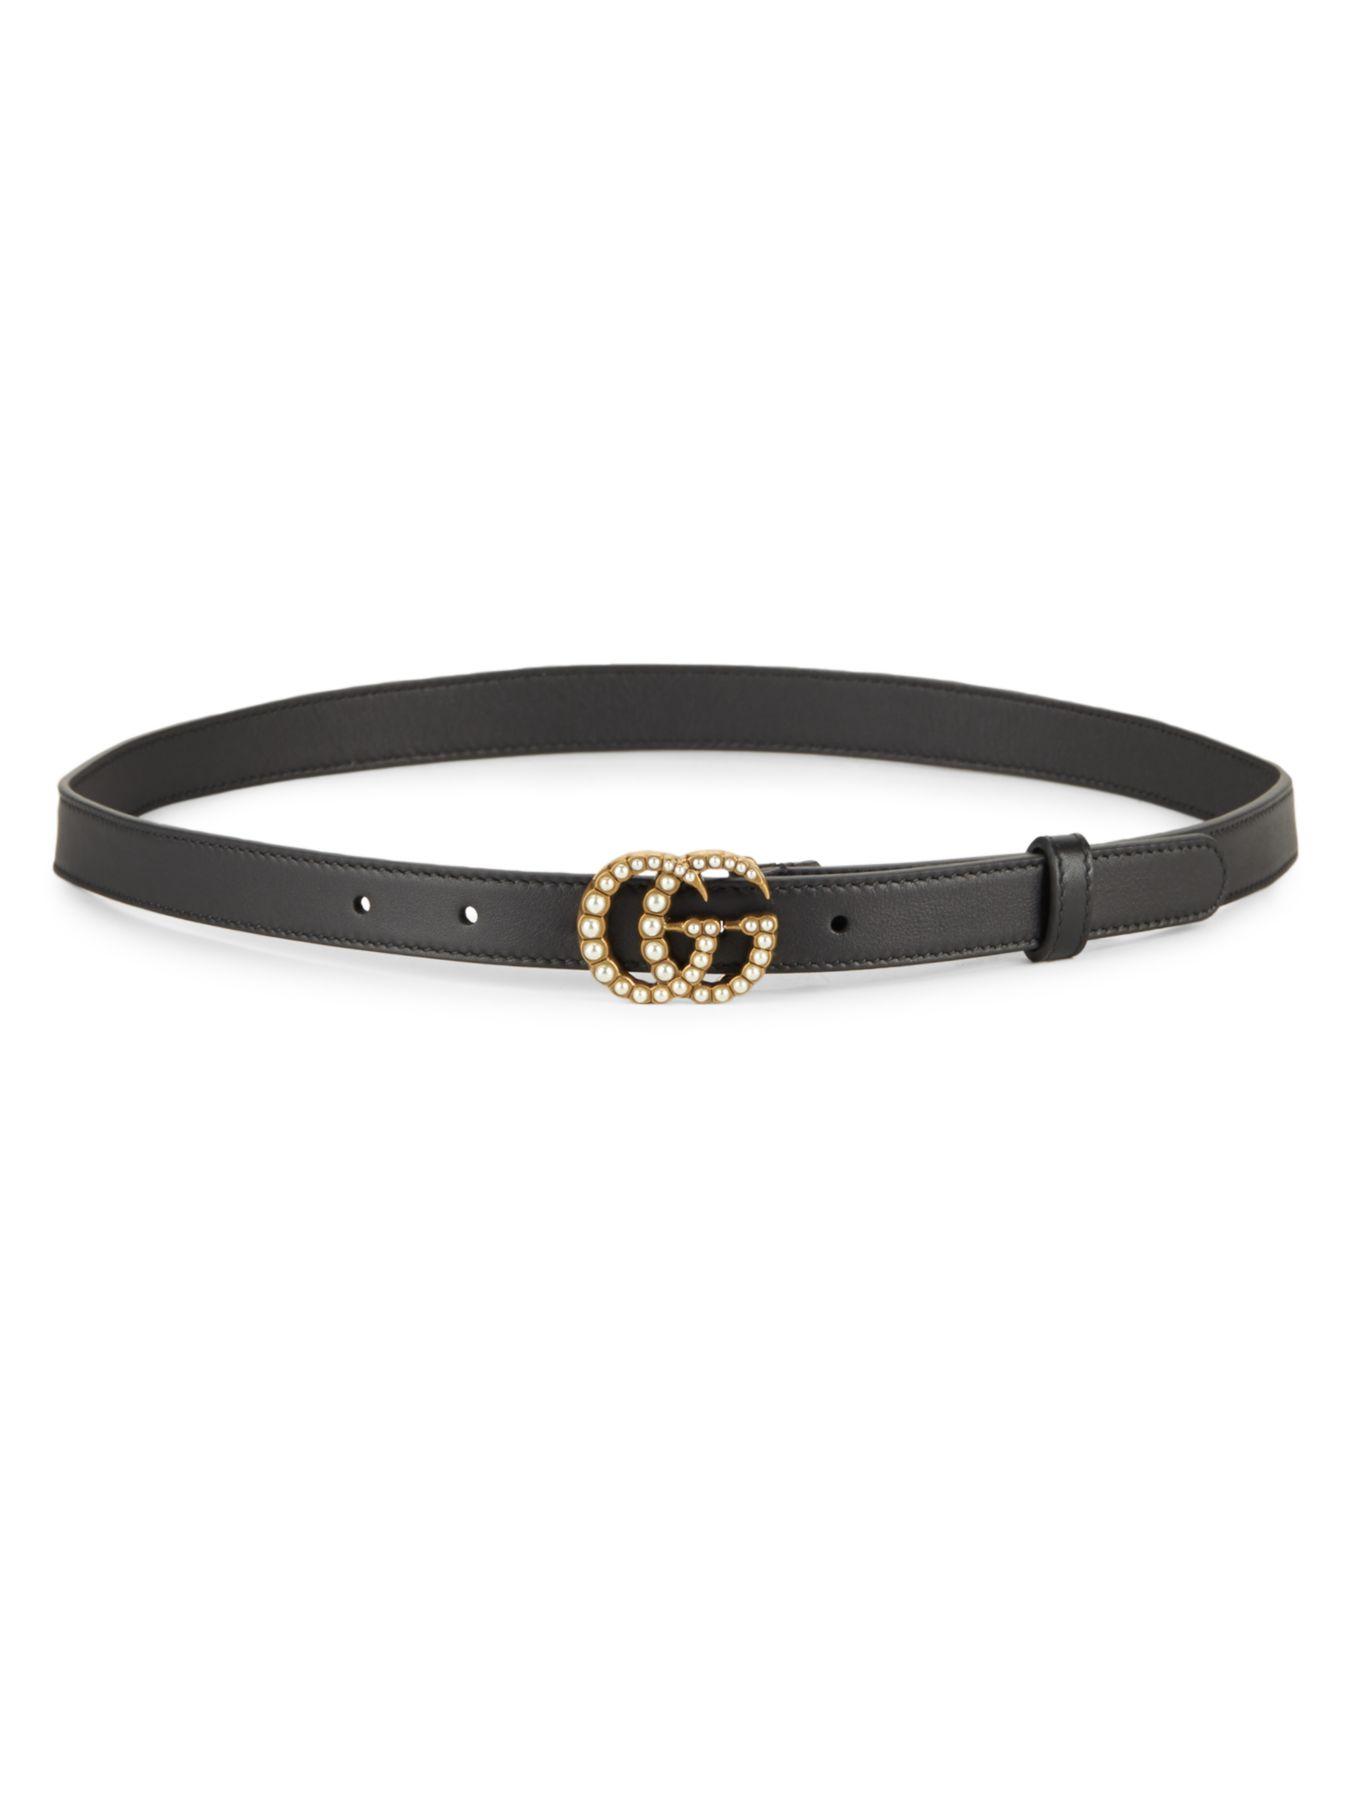 Gucci Pearly GG Leather Belt in Black - Lyst